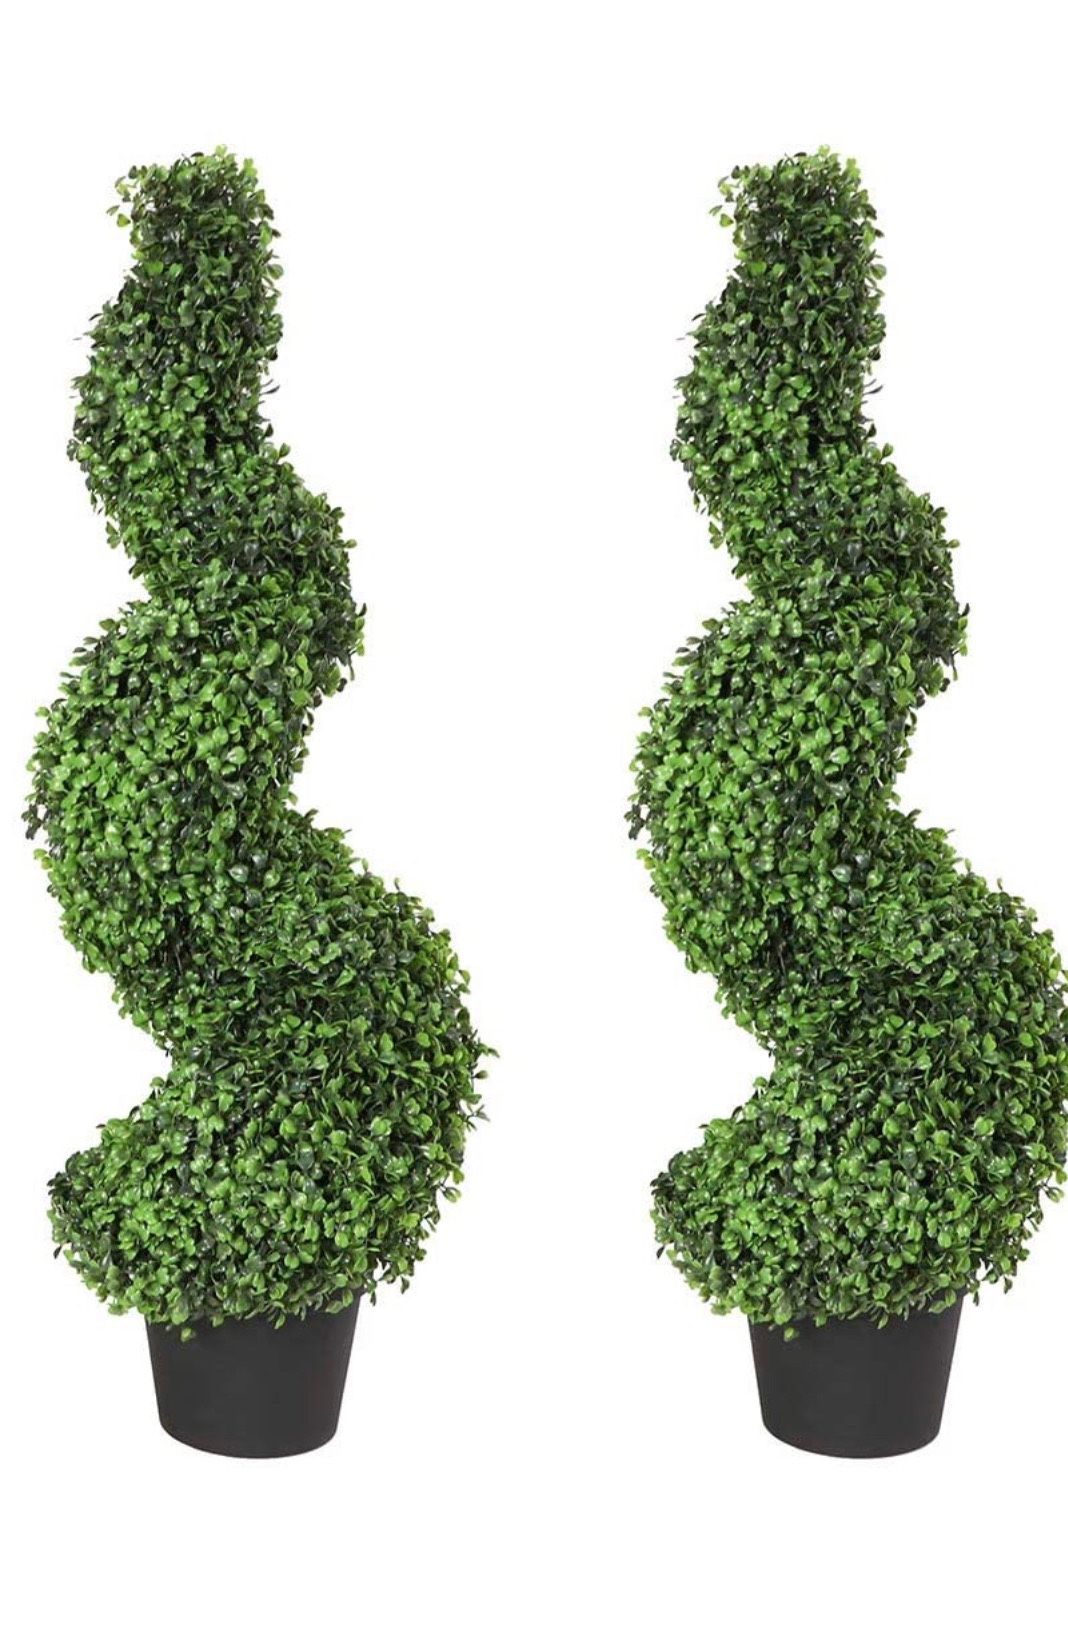 Damomo 3ft (2 Pieces) Topiary Trees Boxwood Artificial Plants Spiral Feaux Plants Potted Fake Plant Green Decorative Indoor or Outdoor (35 Inches).